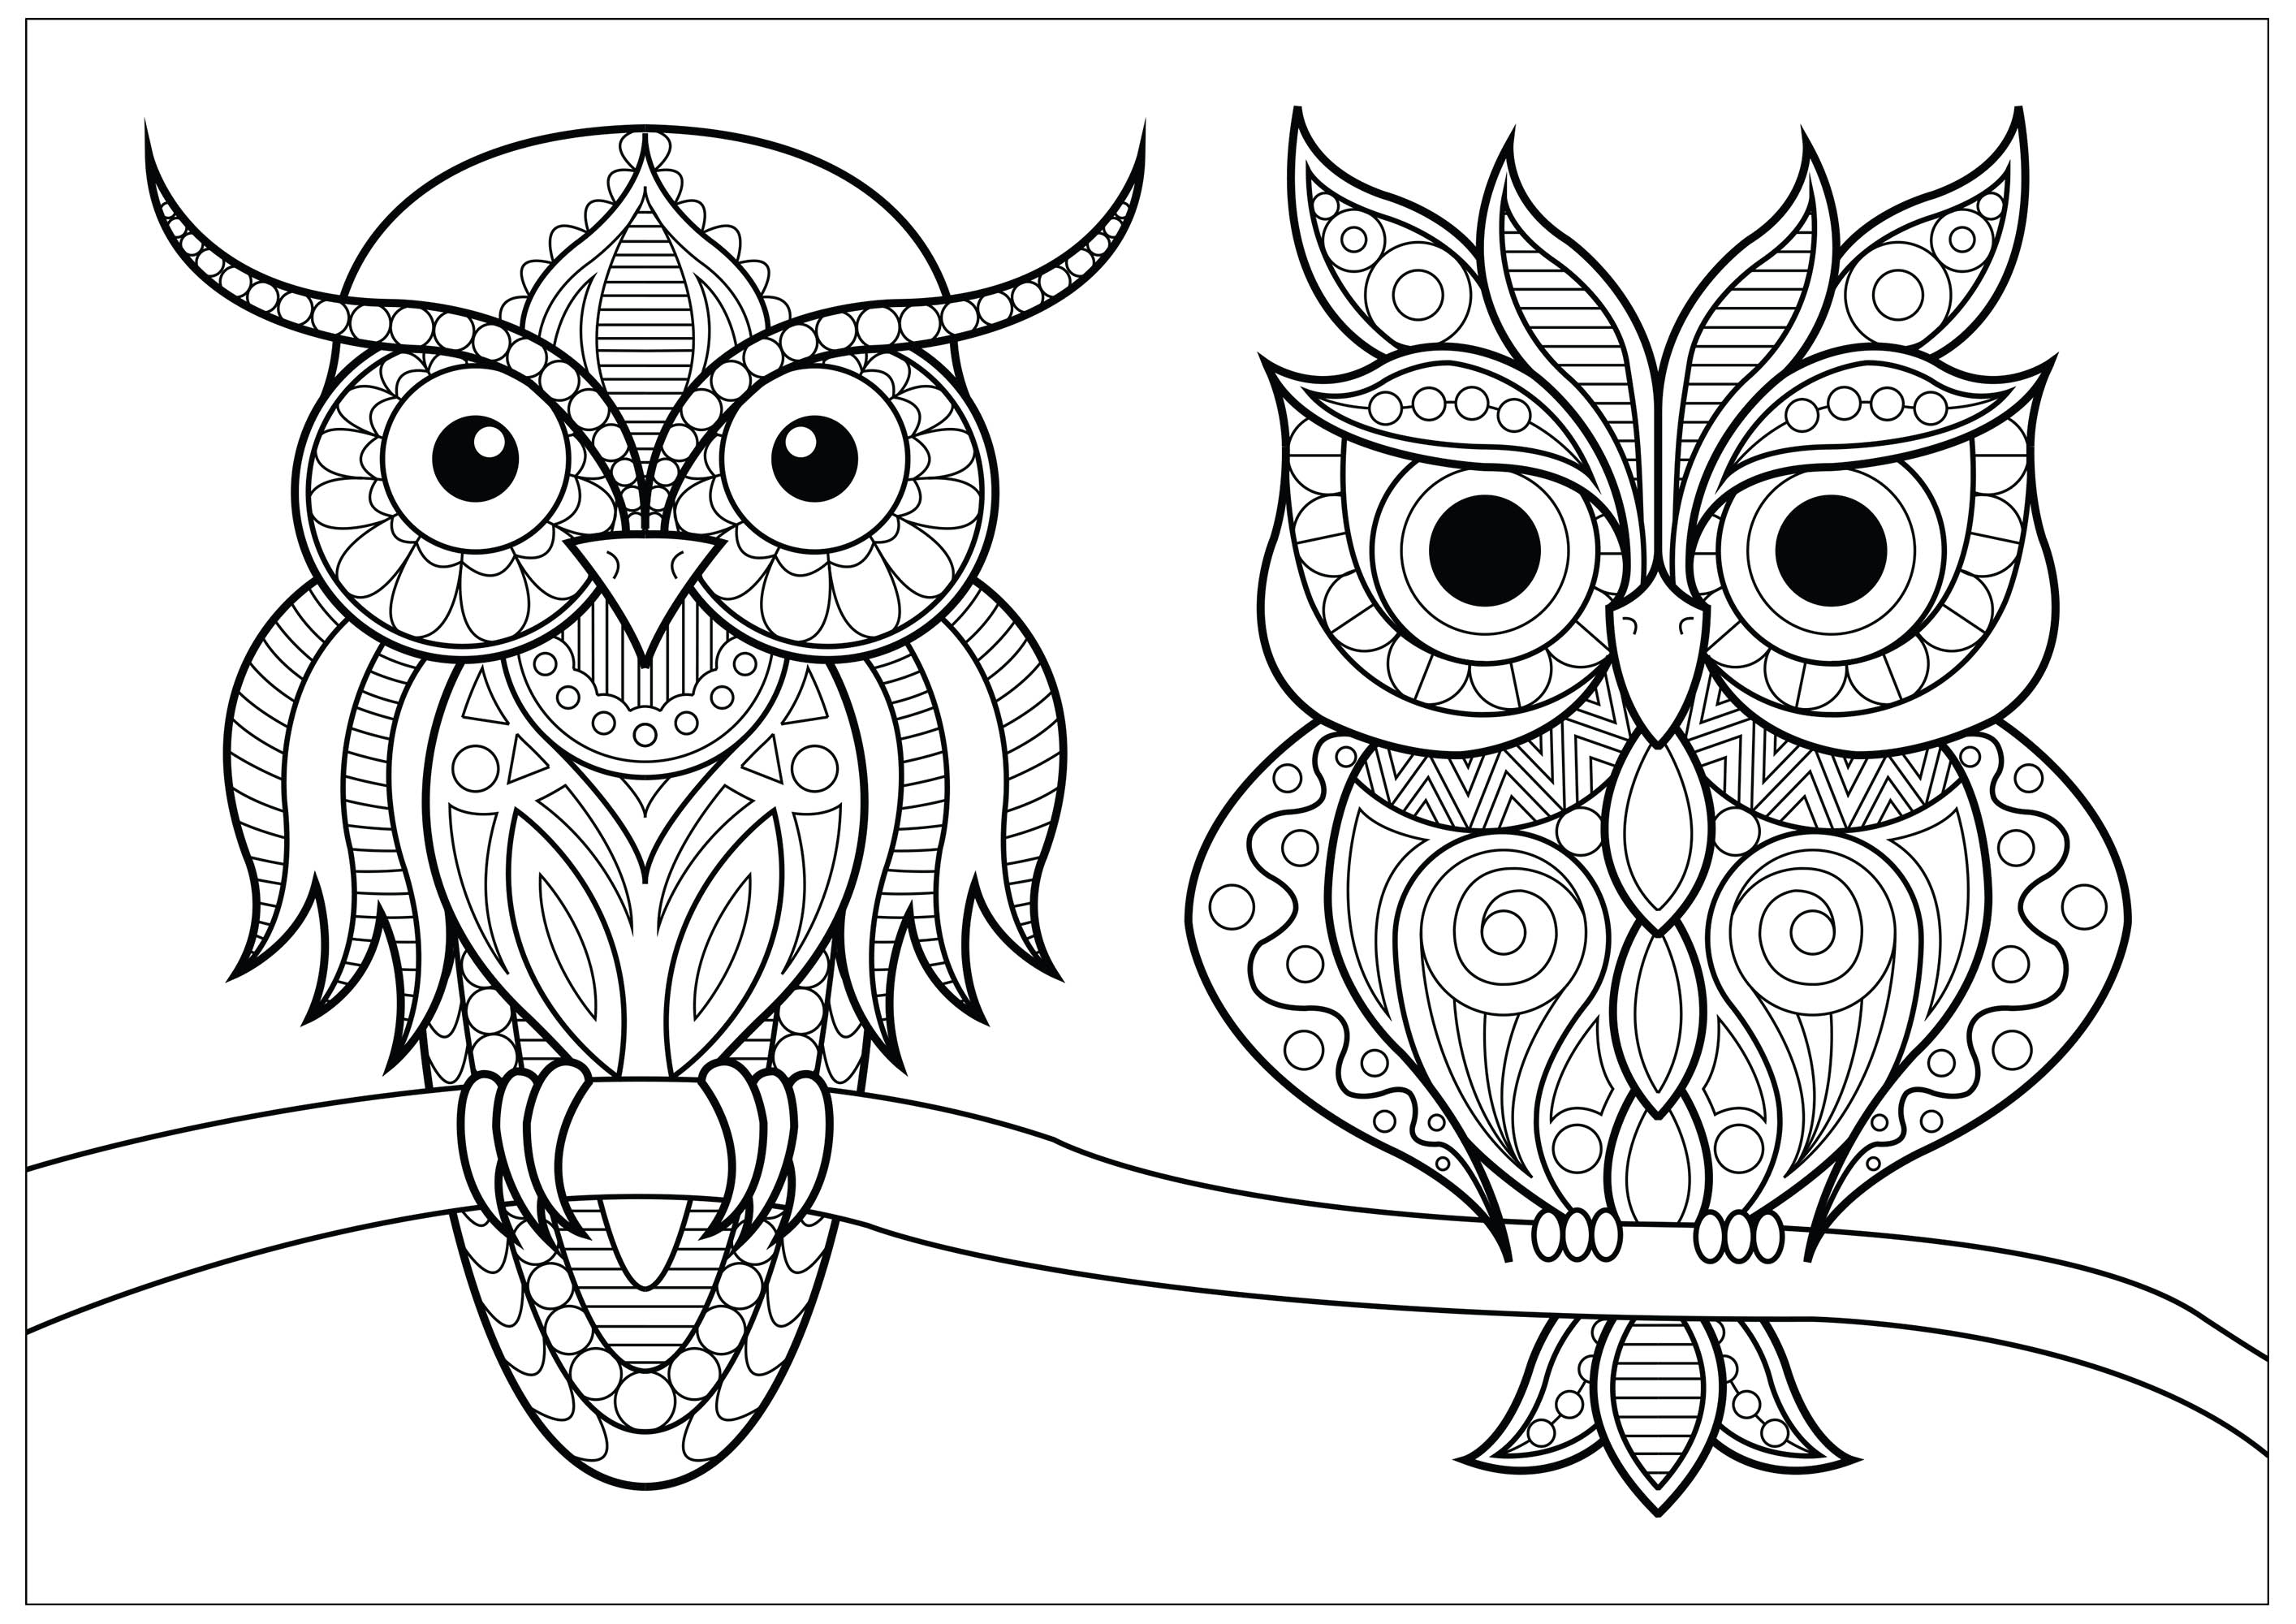  Owl Coloring Pages   7